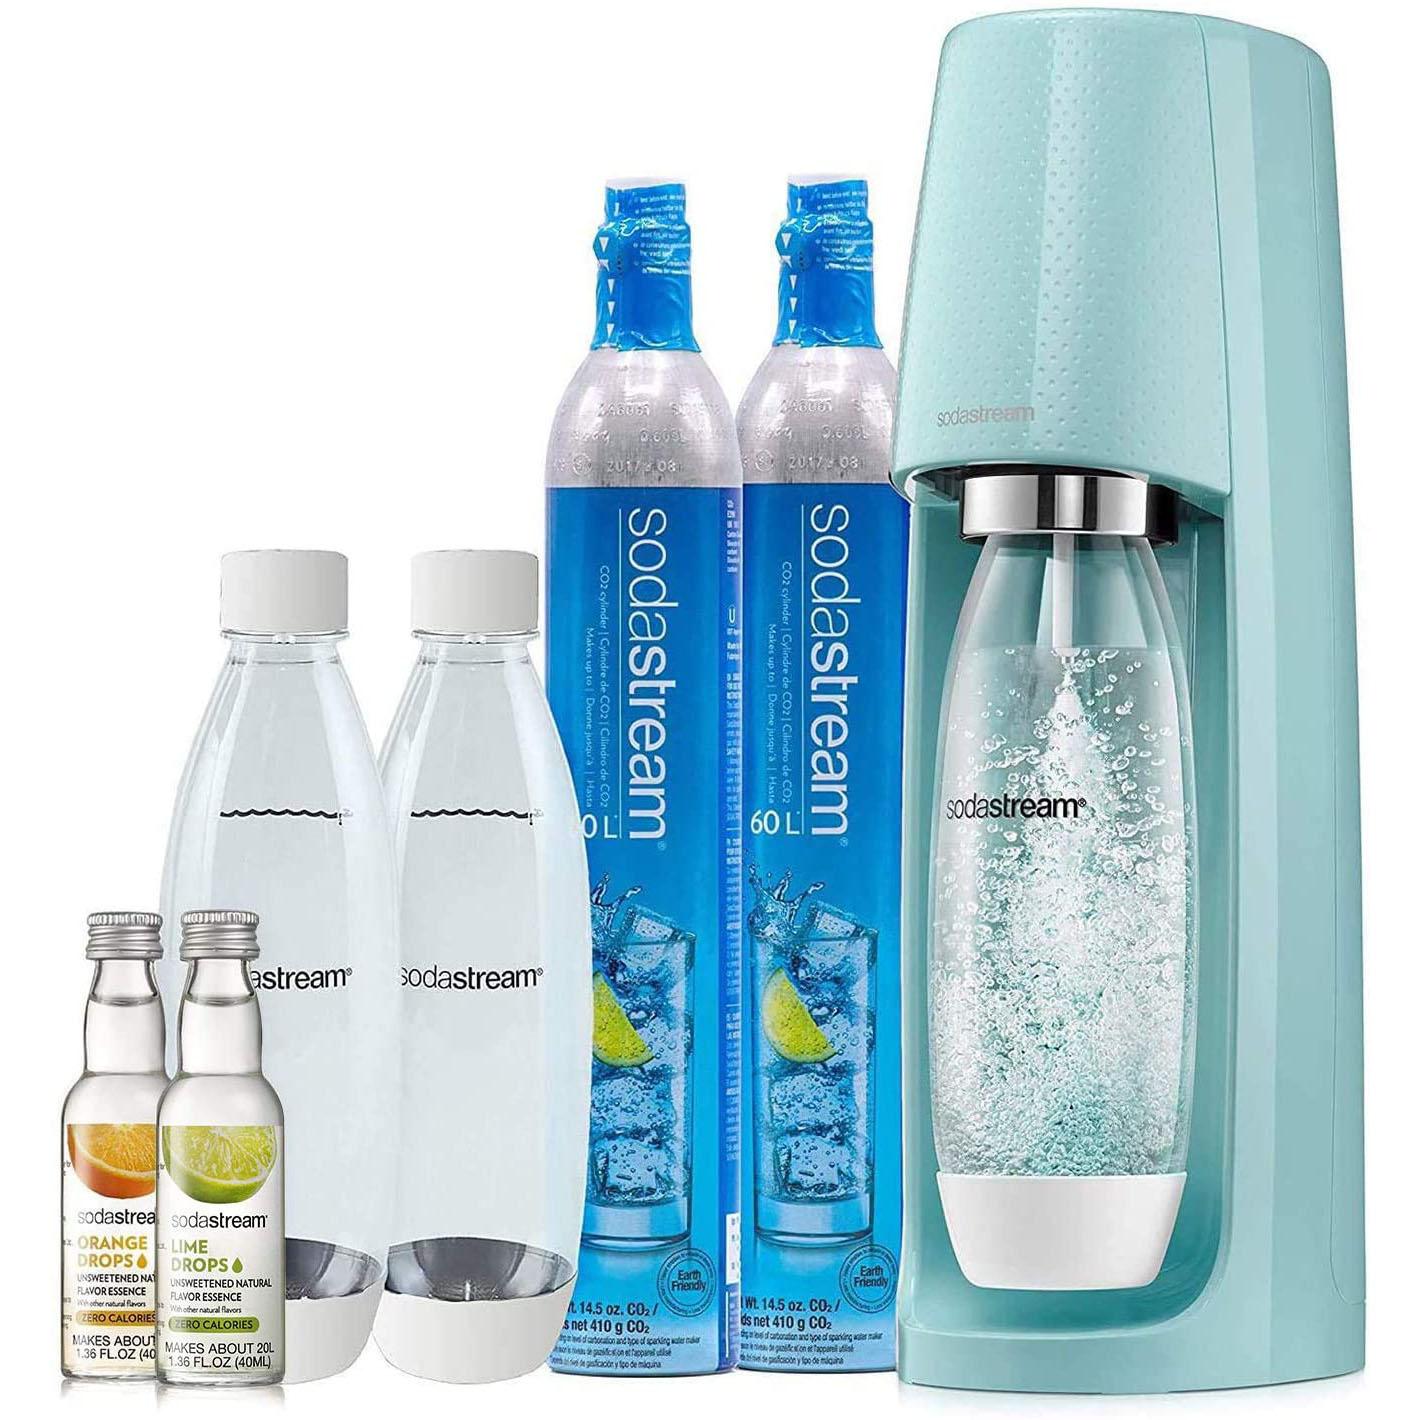 SodaStream Fizzi Sparkling Water Maker Bundle for $109.99 Shipped